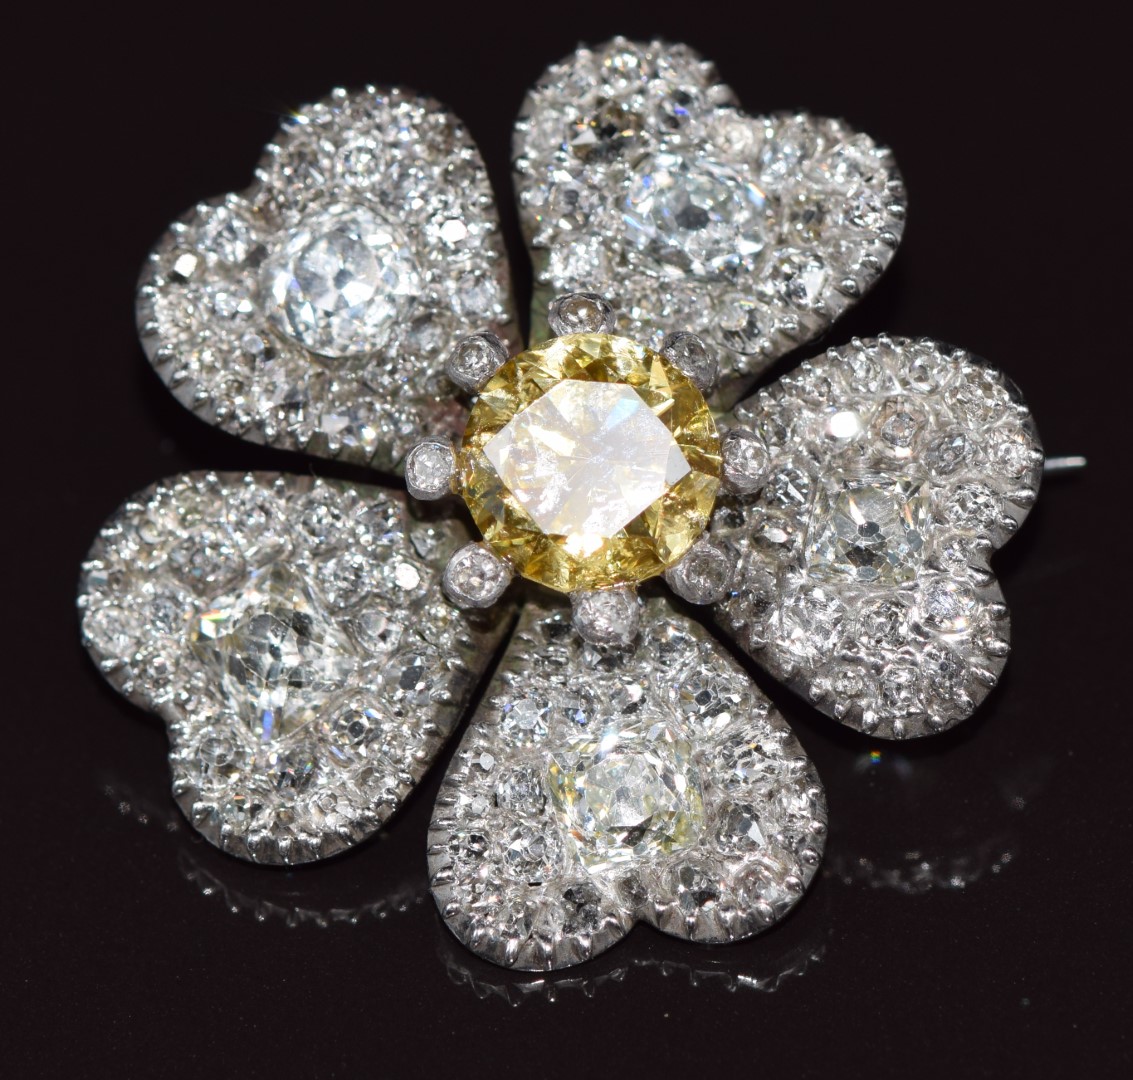 Late Victorian white gold trembler brooch set with a natural yellow diamond of approximately 2.